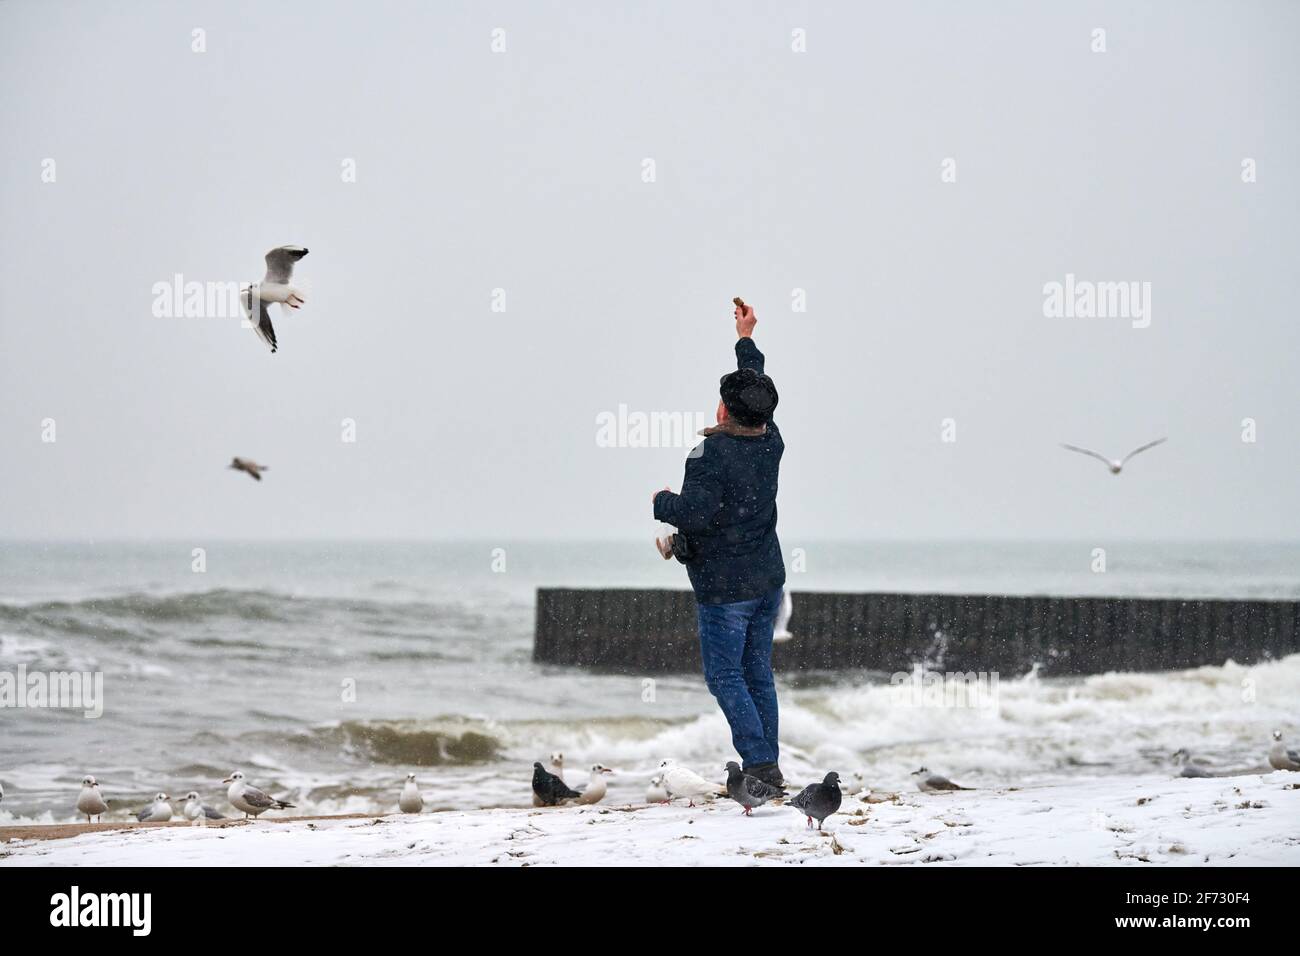 Lonely old man feeding gulls, seagulls and other birds at sea. Back view of person, cloudy winter landscape. Stock Photo